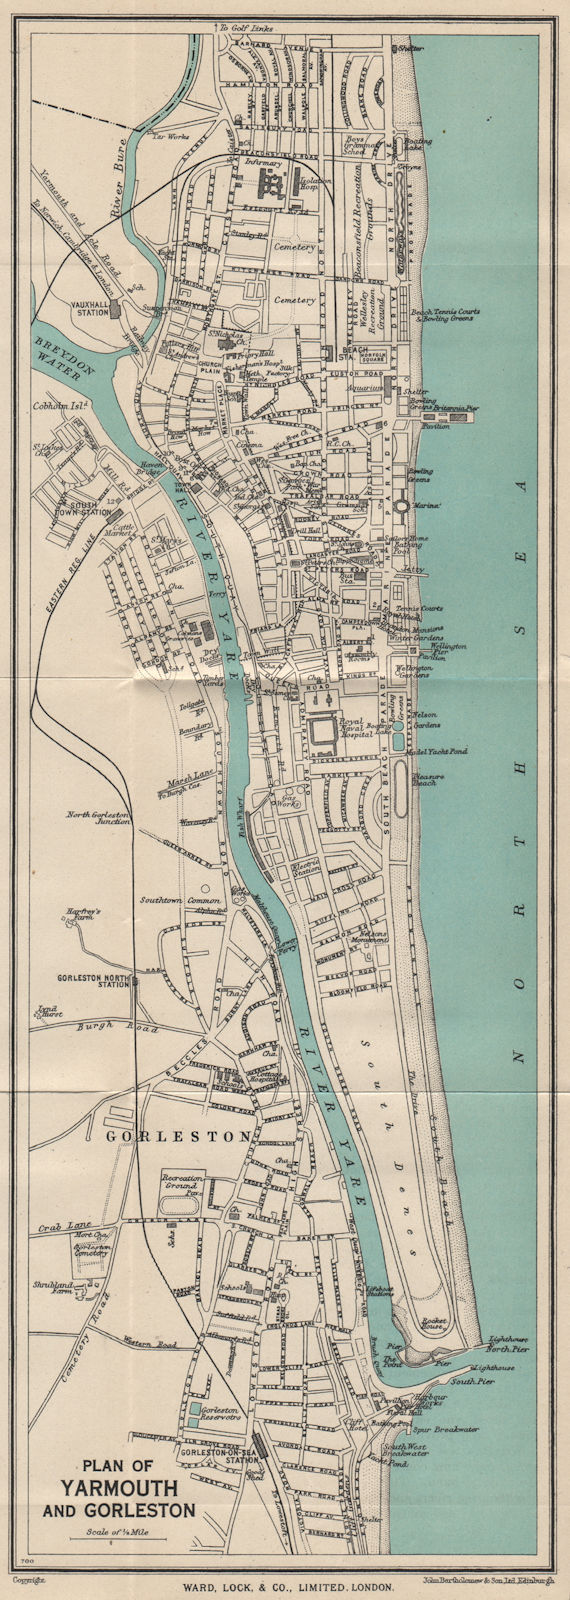 Associate Product YARMOUTH AND GORLESTON vintage town/city plan. Norfolk. WARD LOCK 1950 old map